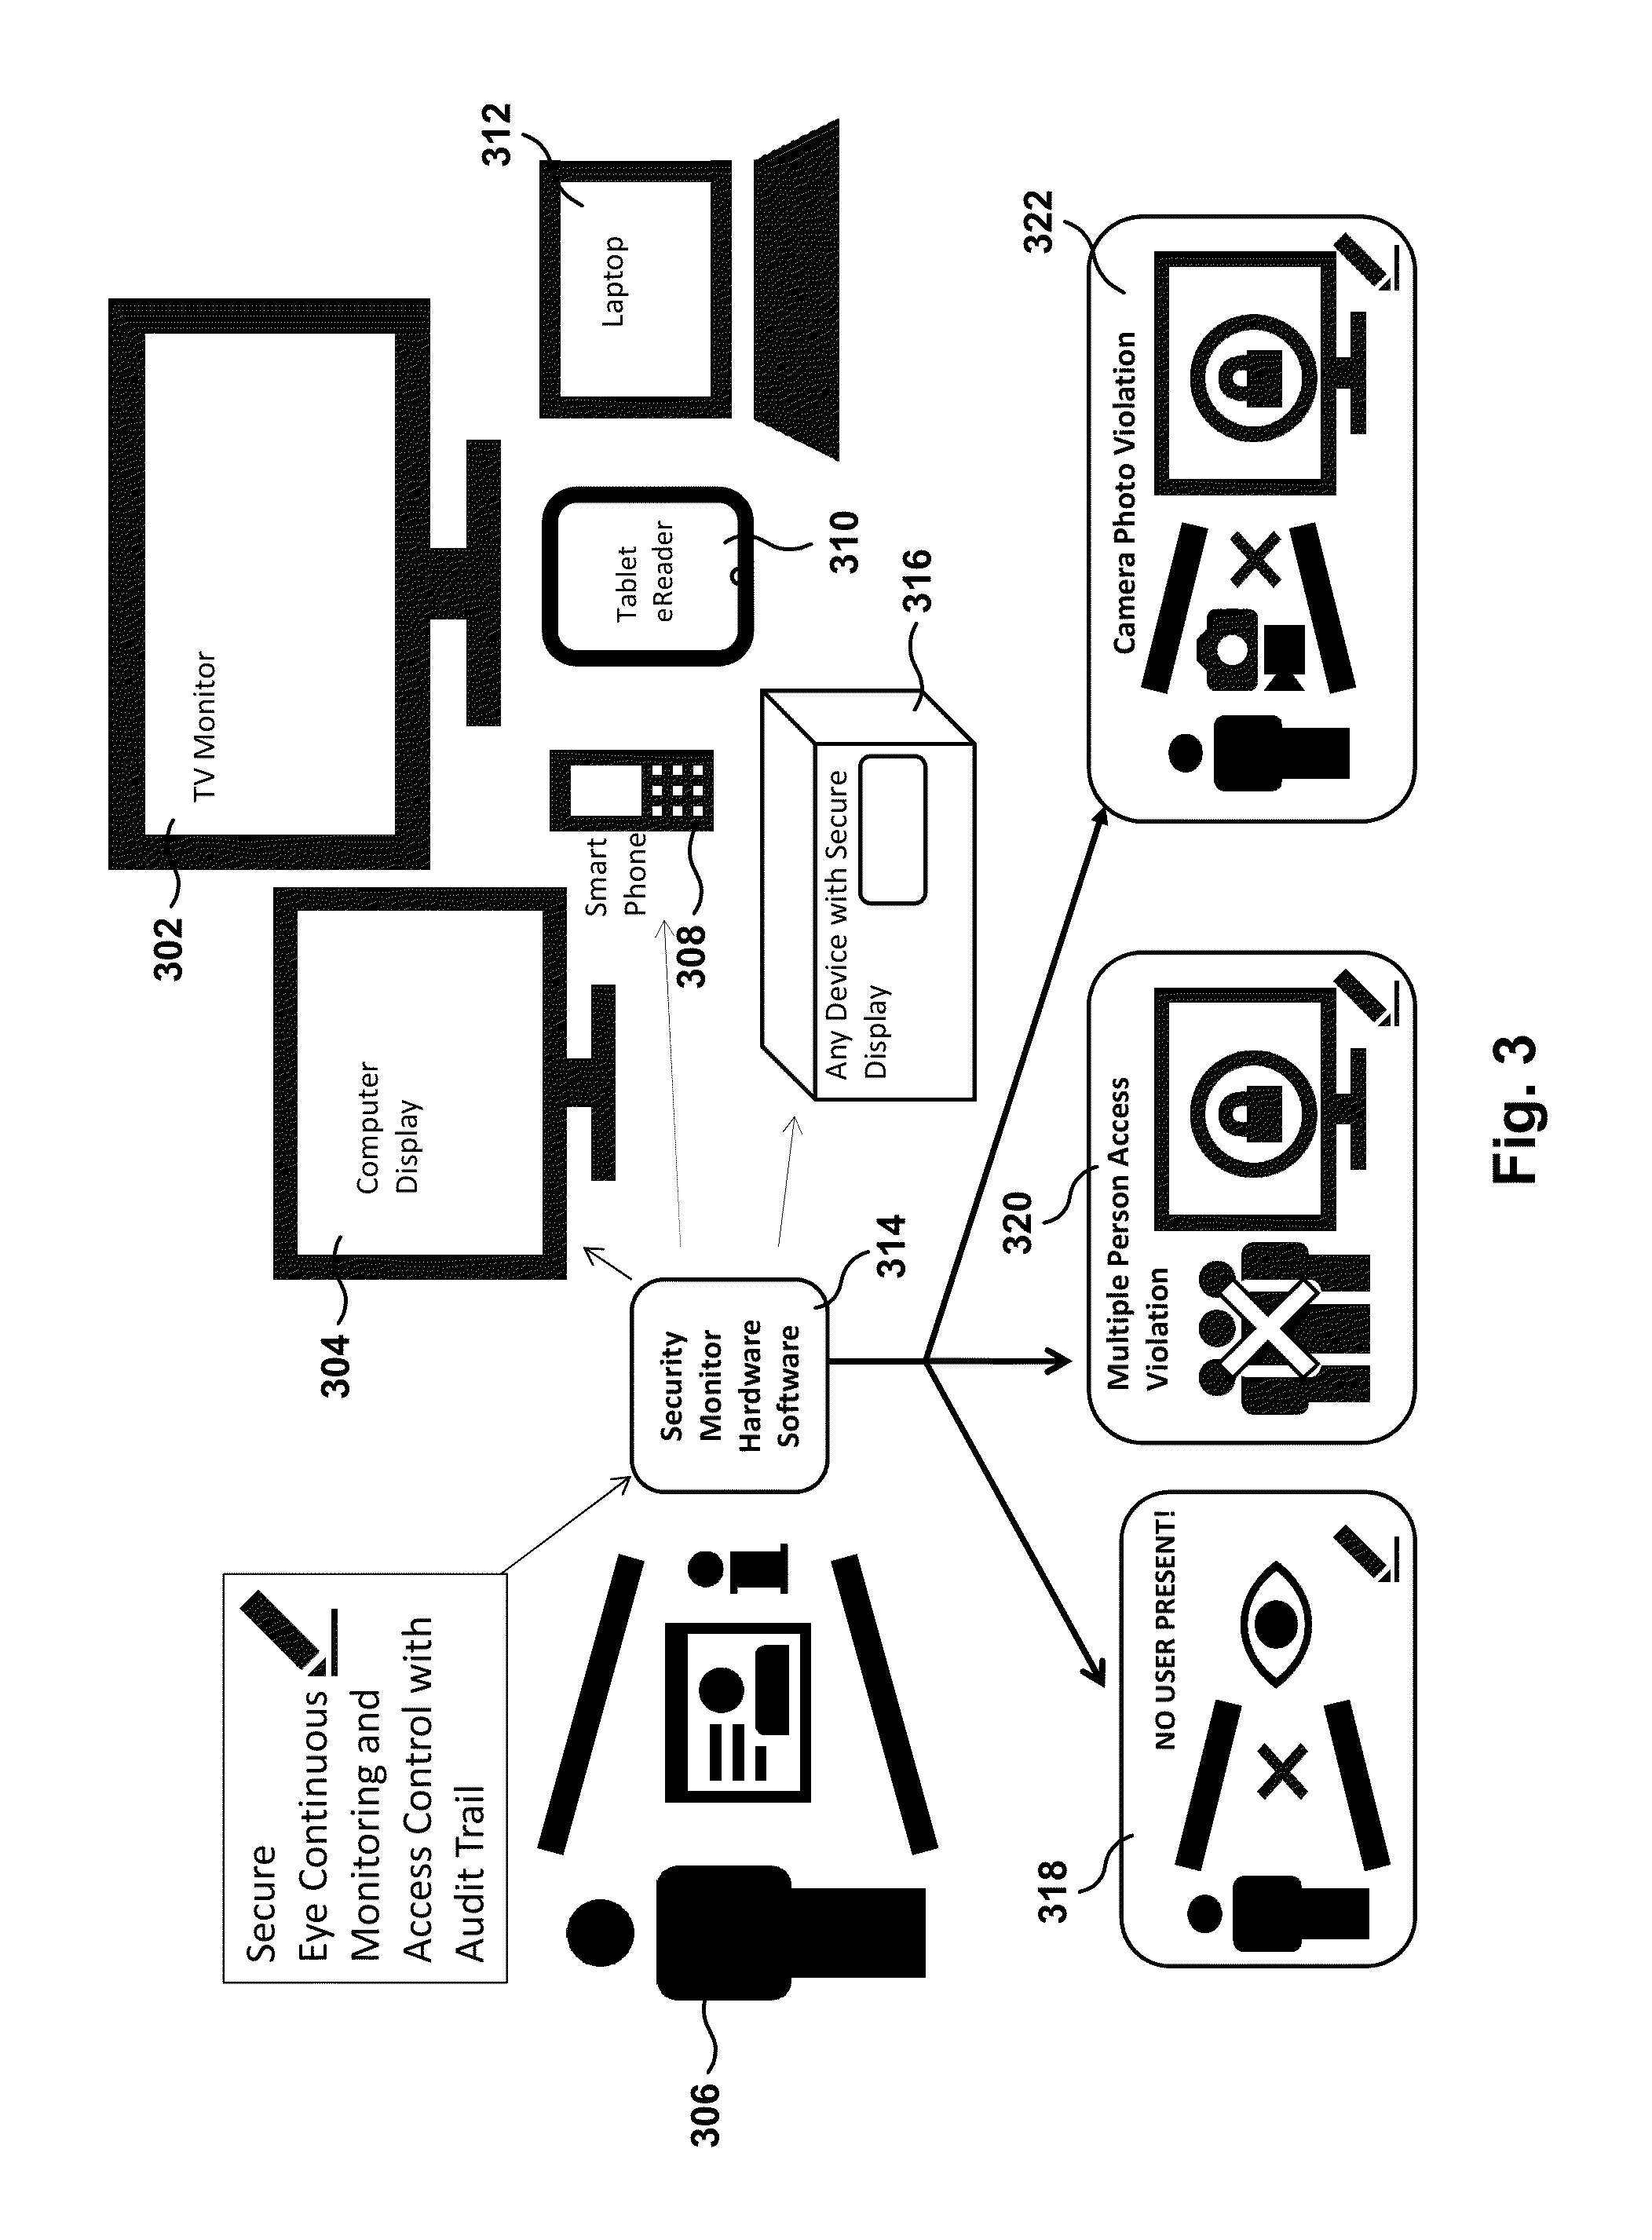 Continuous Monitoring of Computer User and Computer Activities